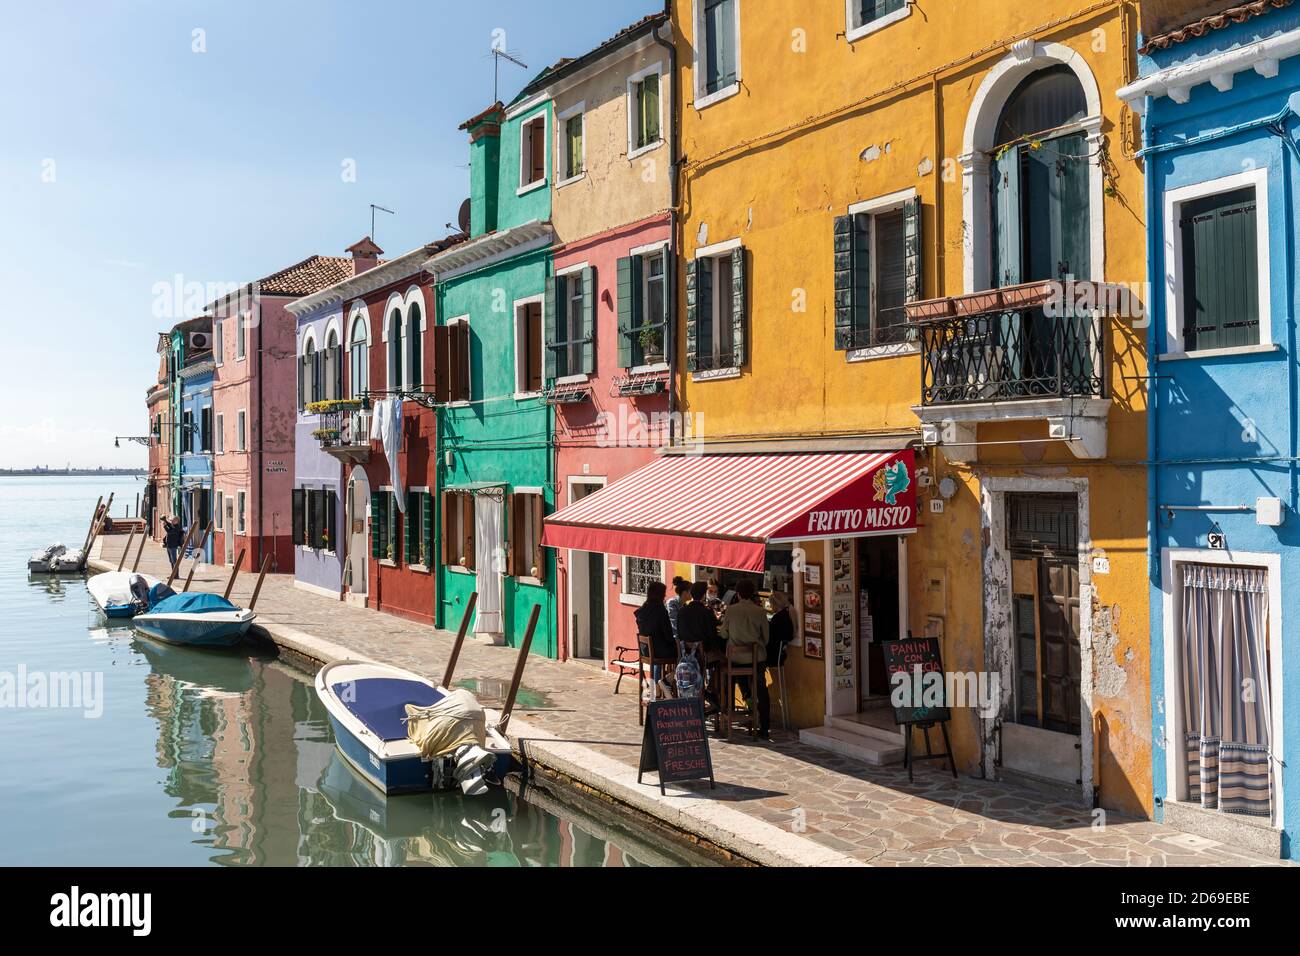 The Venetian Lagoon island of Burano and its colourful picturesque buildings and restaurant with boats moored in the canal.  Venice, Italy. 2020 Stock Photo